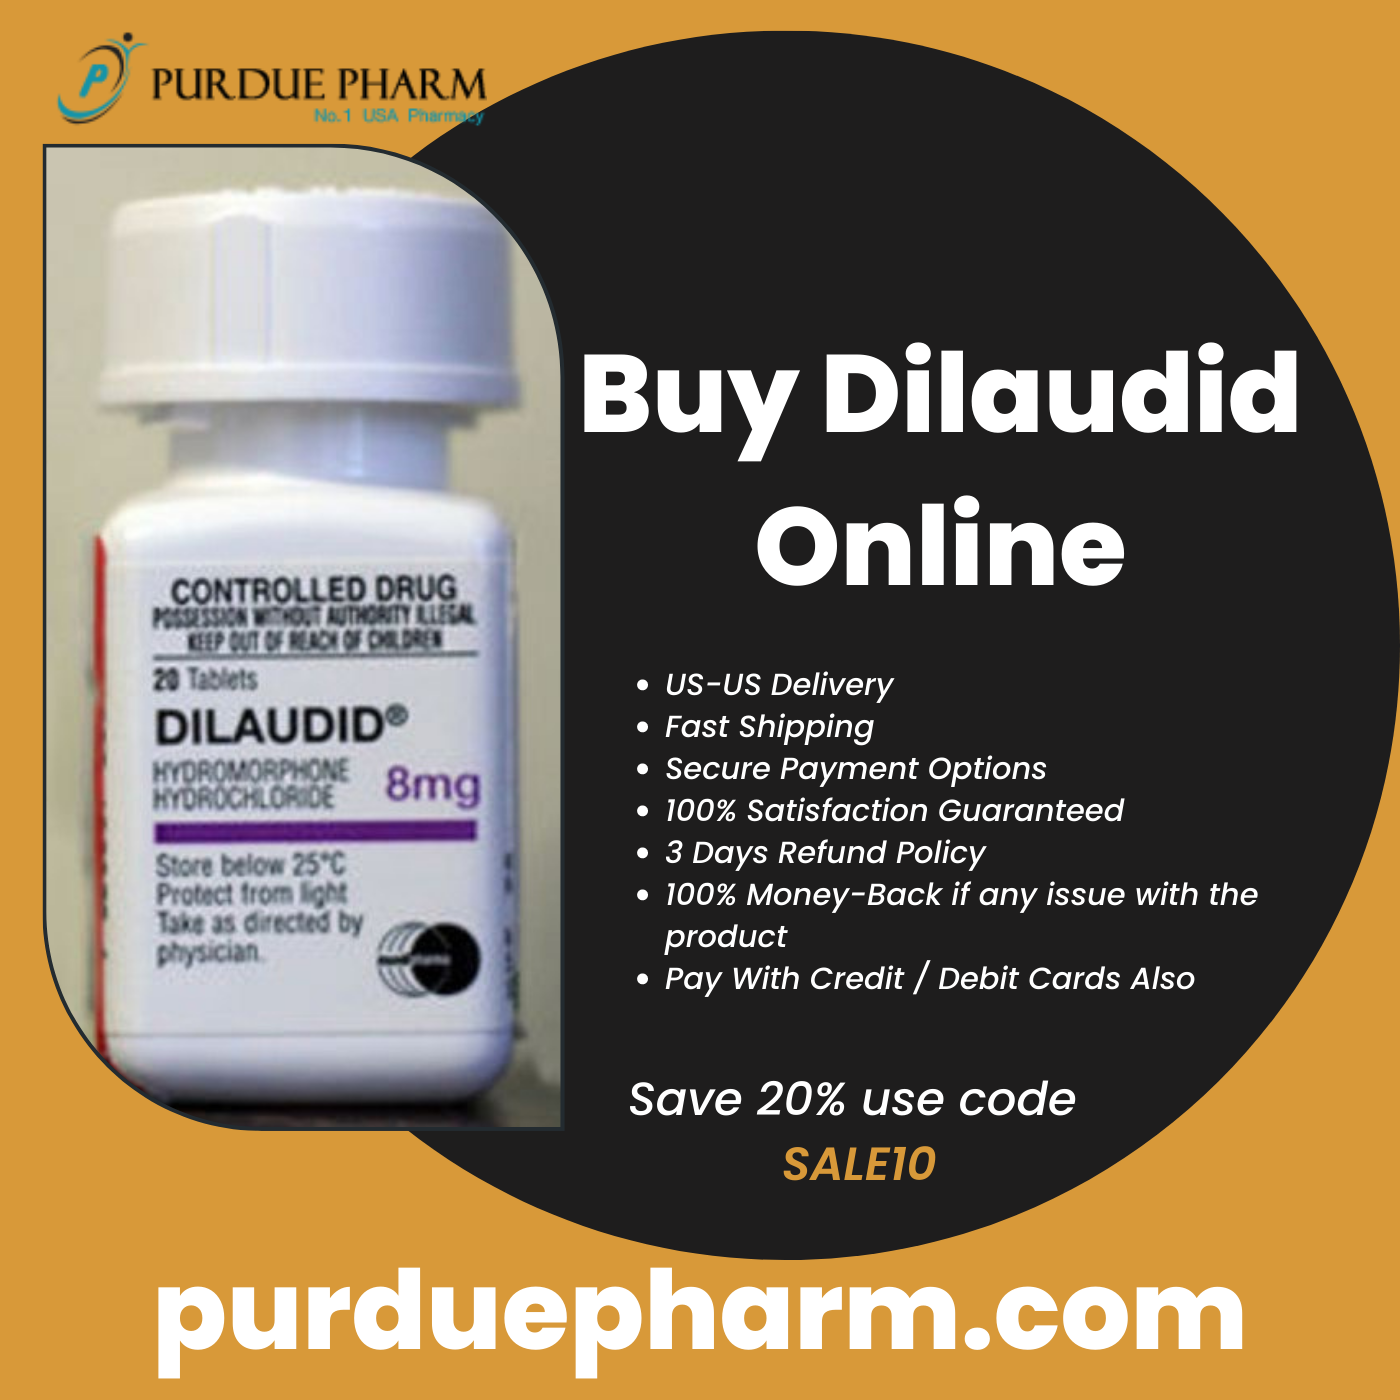 Order Dilaudid Online At Cheap Price With Huge Discount